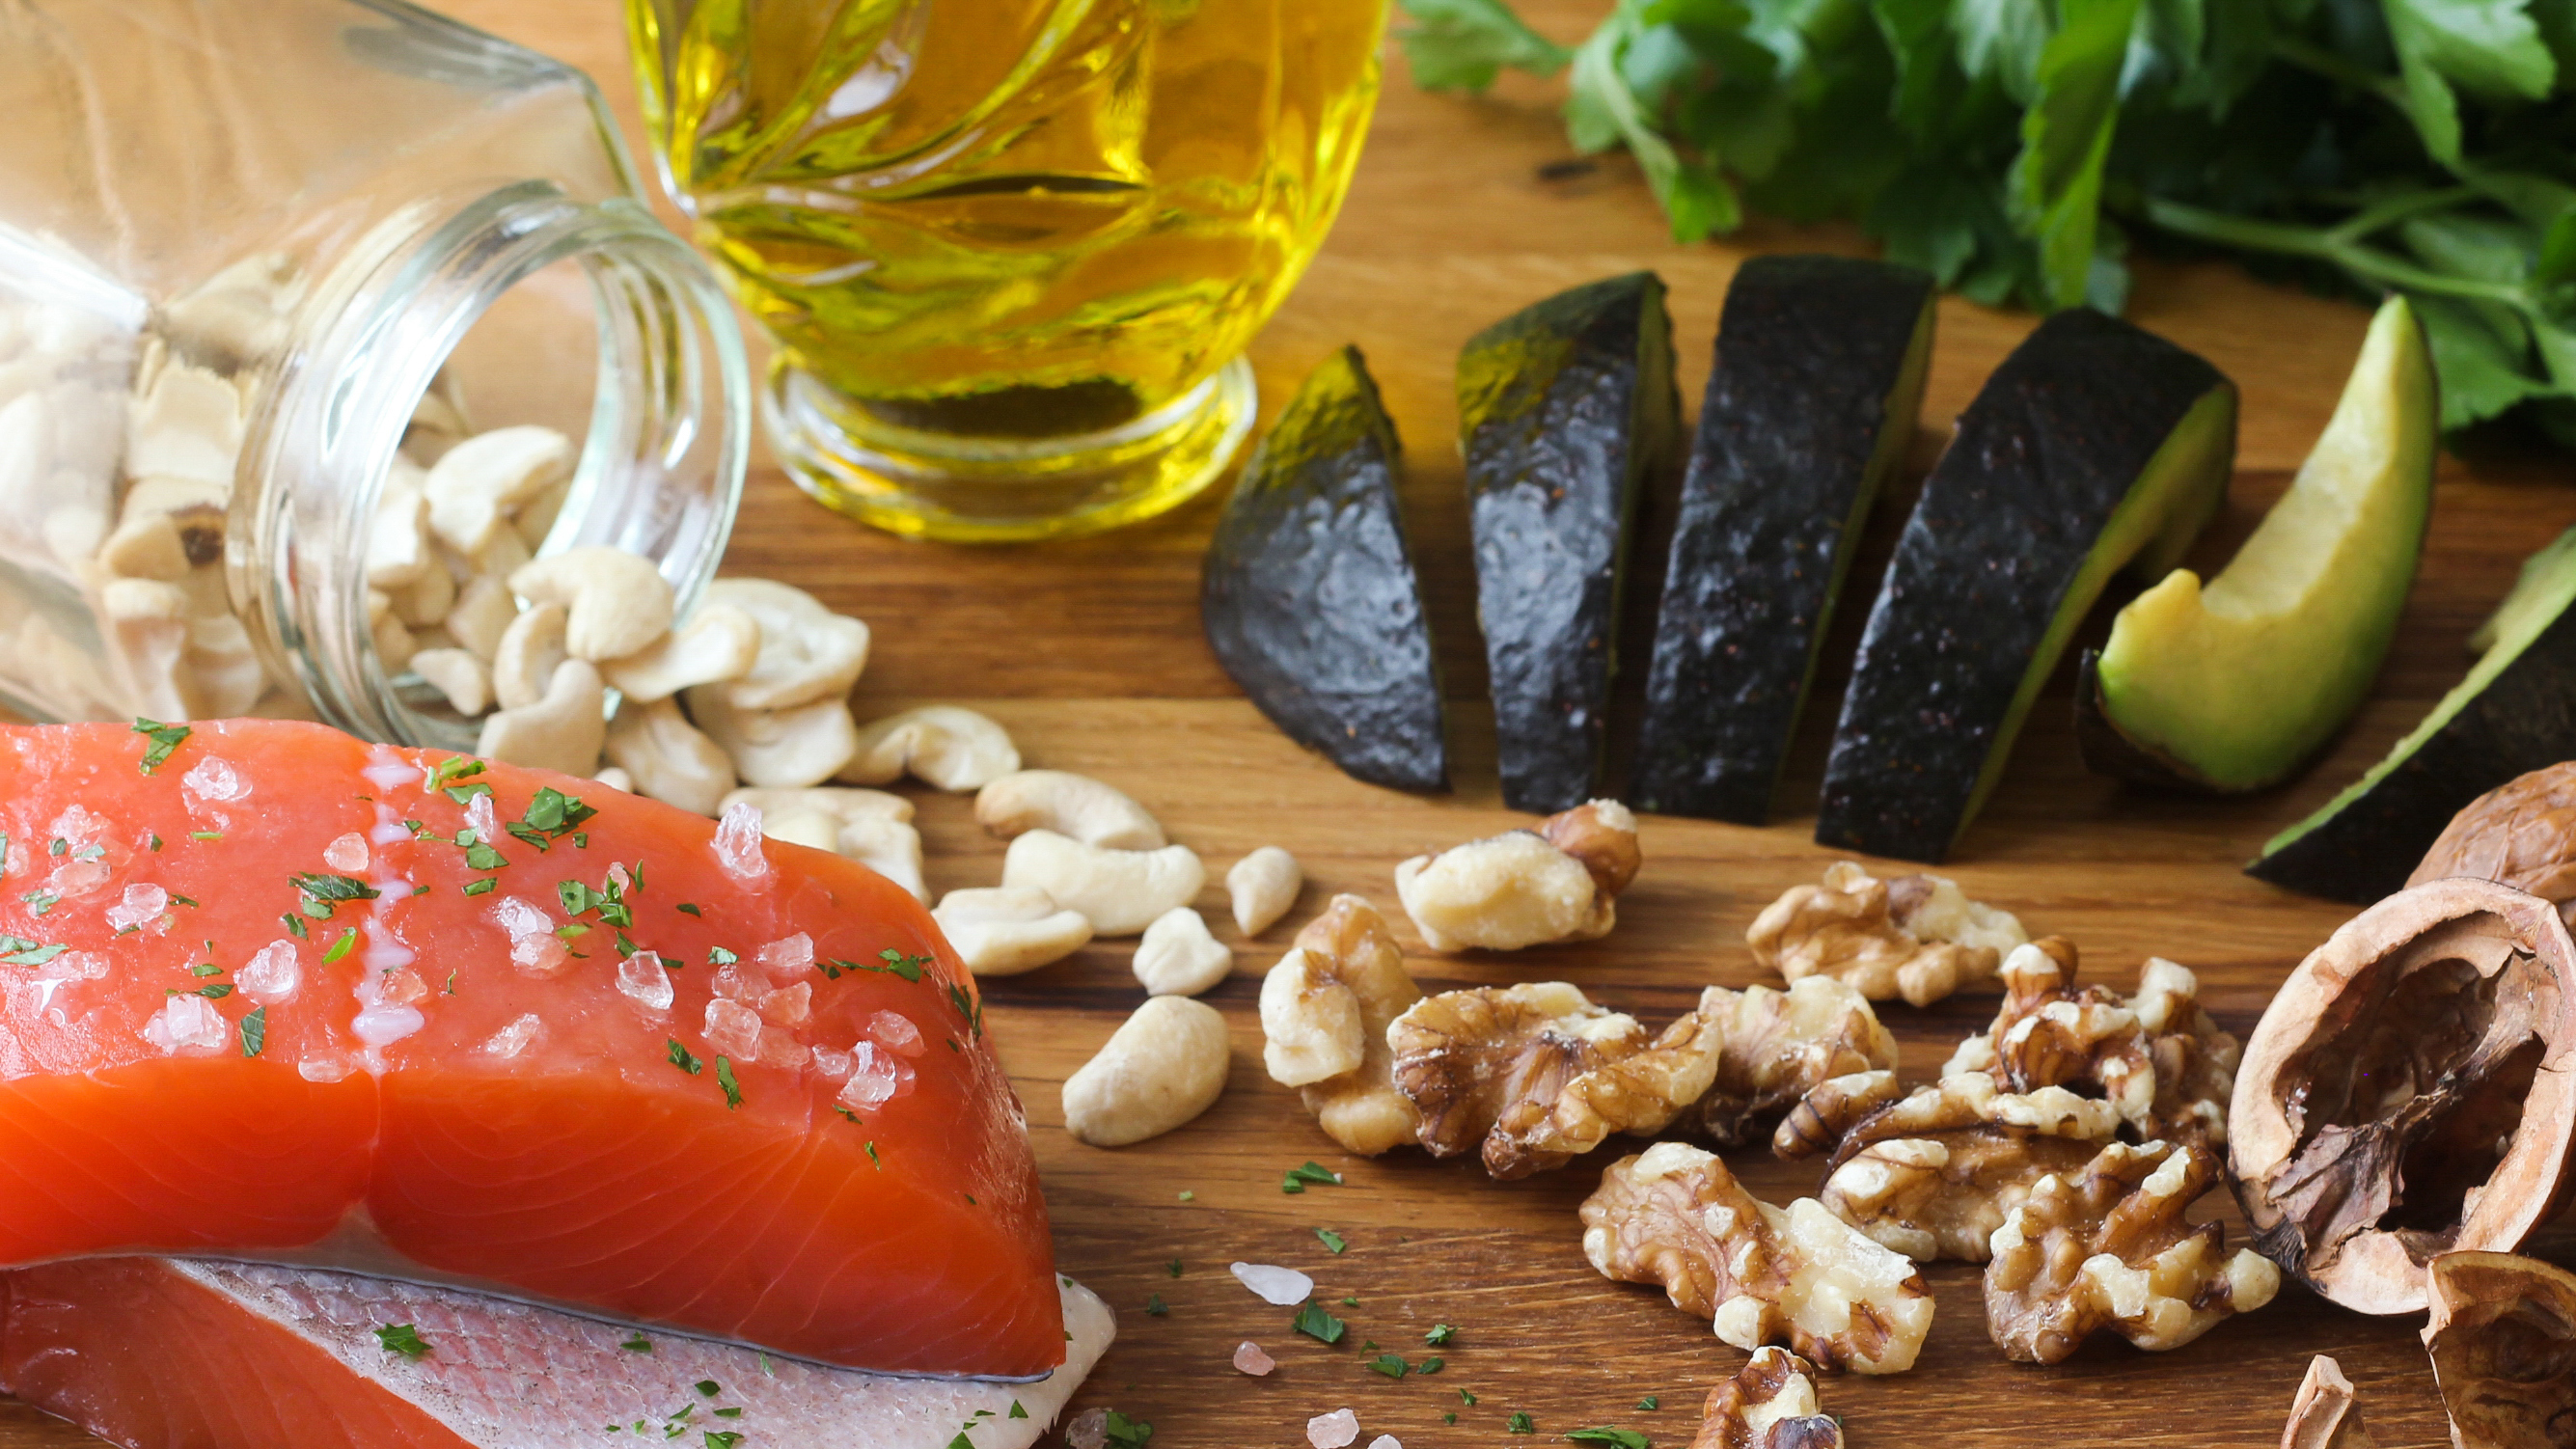 Deep sea fish, avocados, nuts, and olive oil are all sources of omega-3